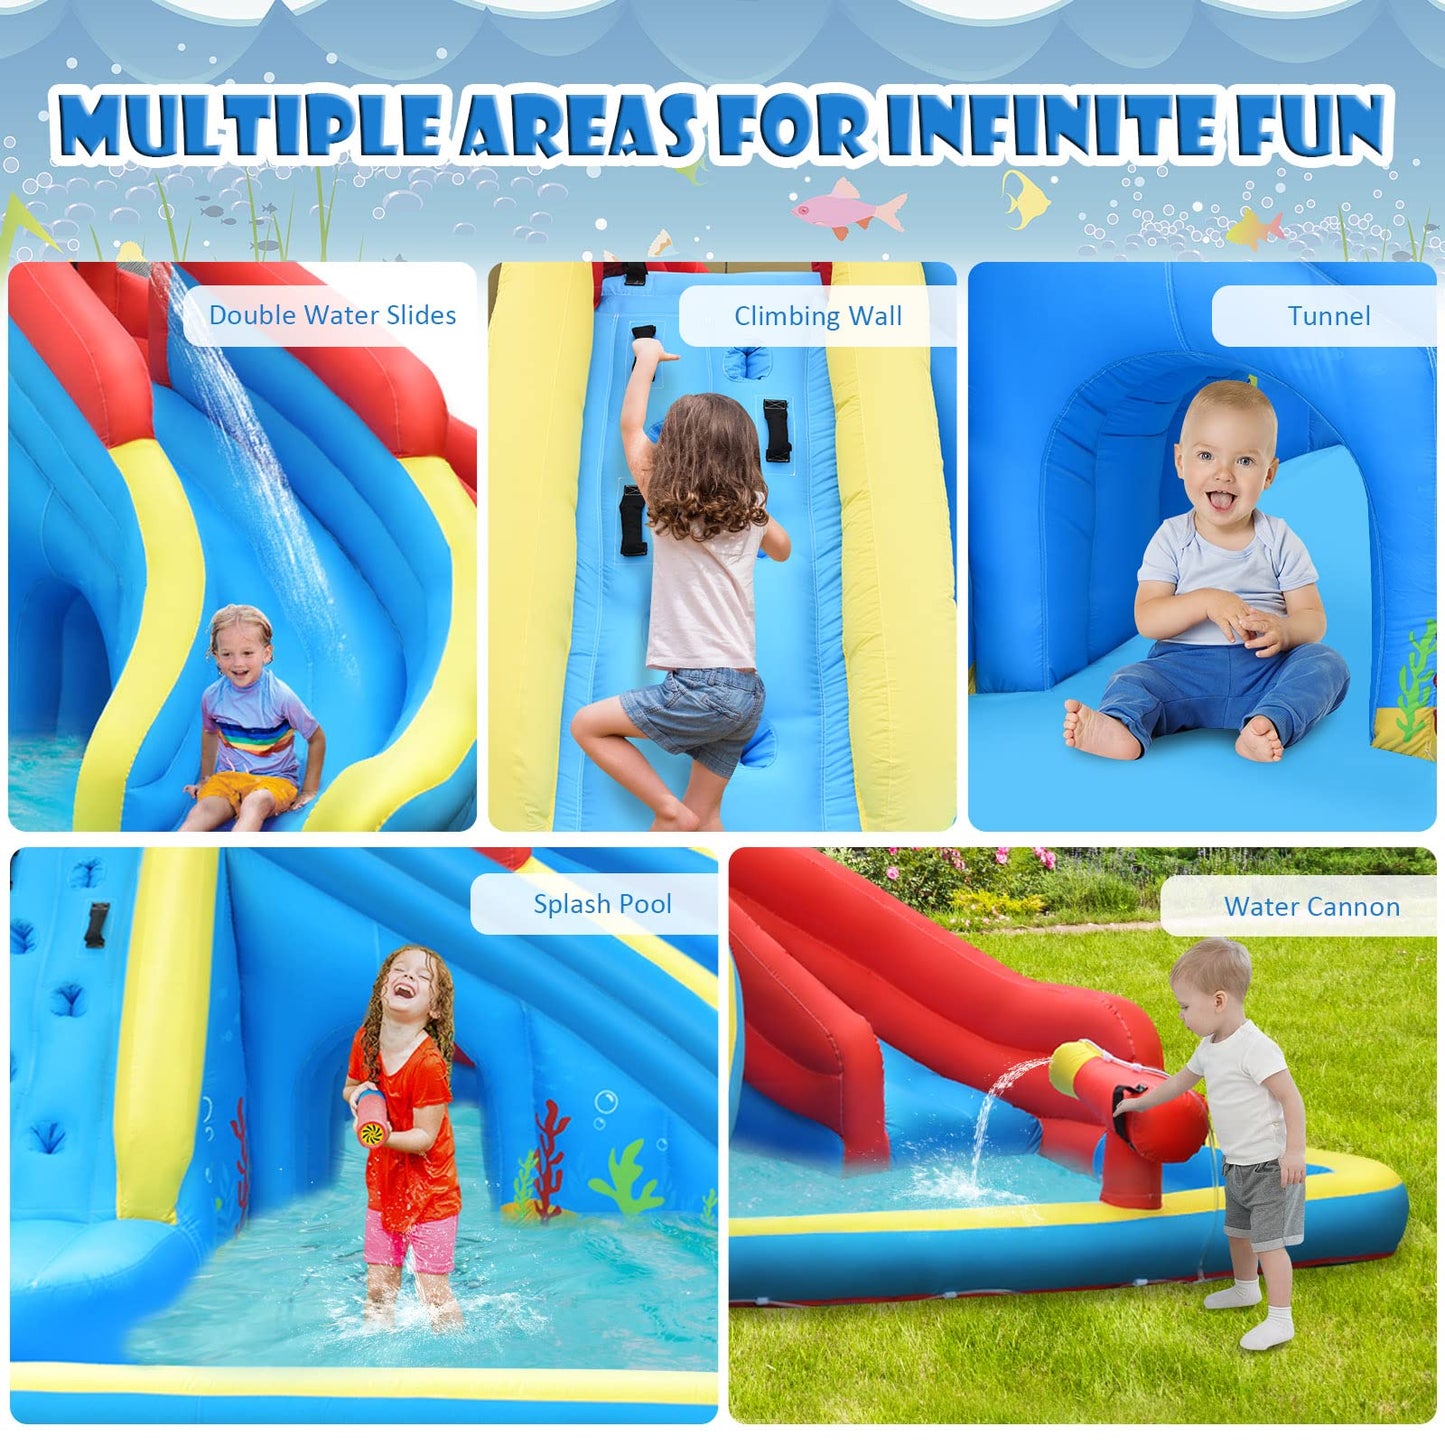 BOUNTECH Inflatable Water Slide, 7 in 1 Waterslide Park for Kids Outdoor Fun with Double Long Slide, 950w Blower, Splash Pool, Crab Theme Blow up Water Slides for Kids and Adults Backyard Party Gifts With 950W Air Blower